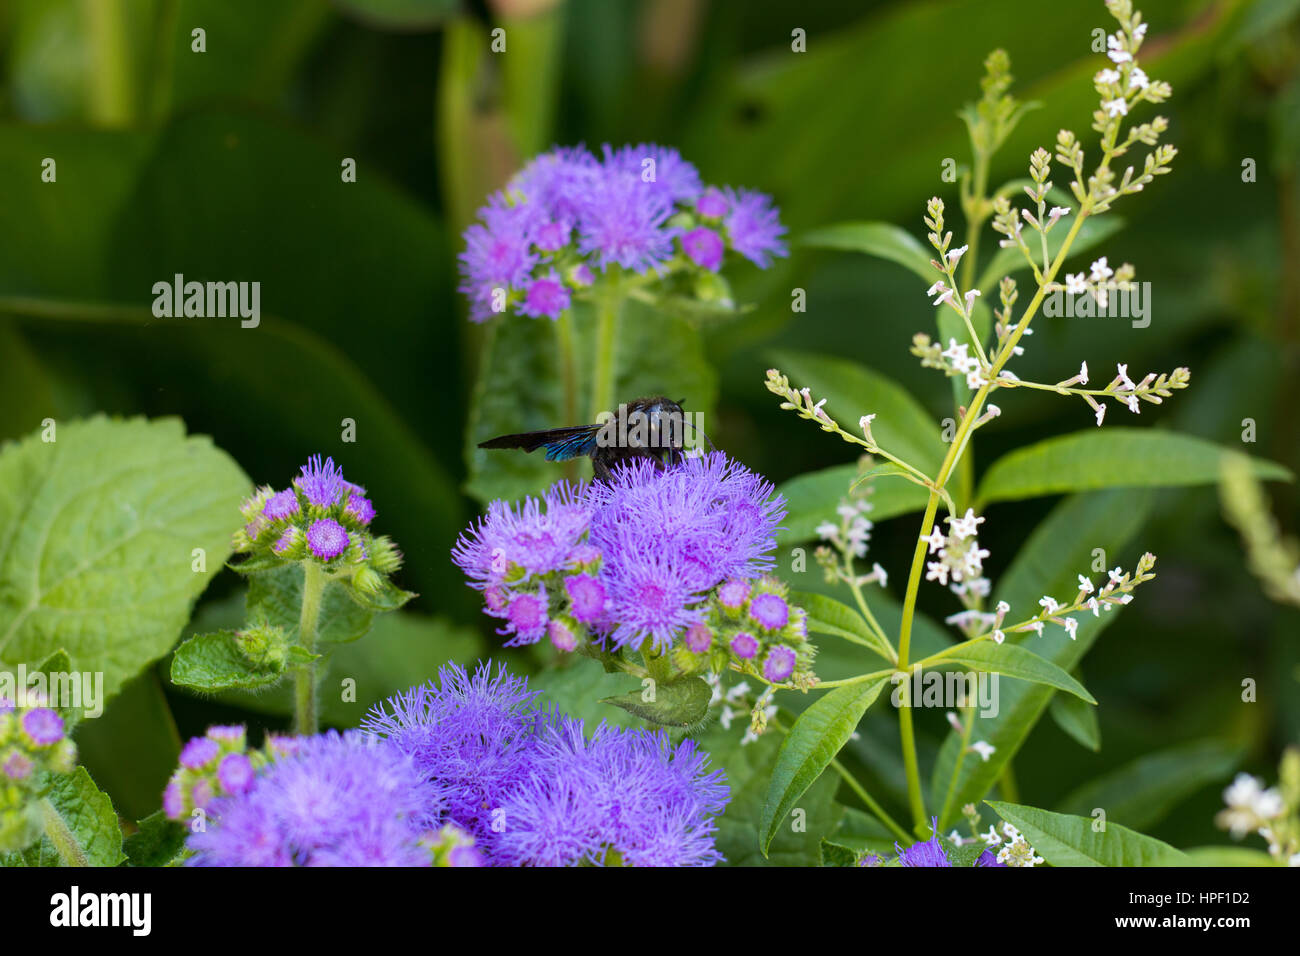 Moth on Violet Flowers Stock Photo